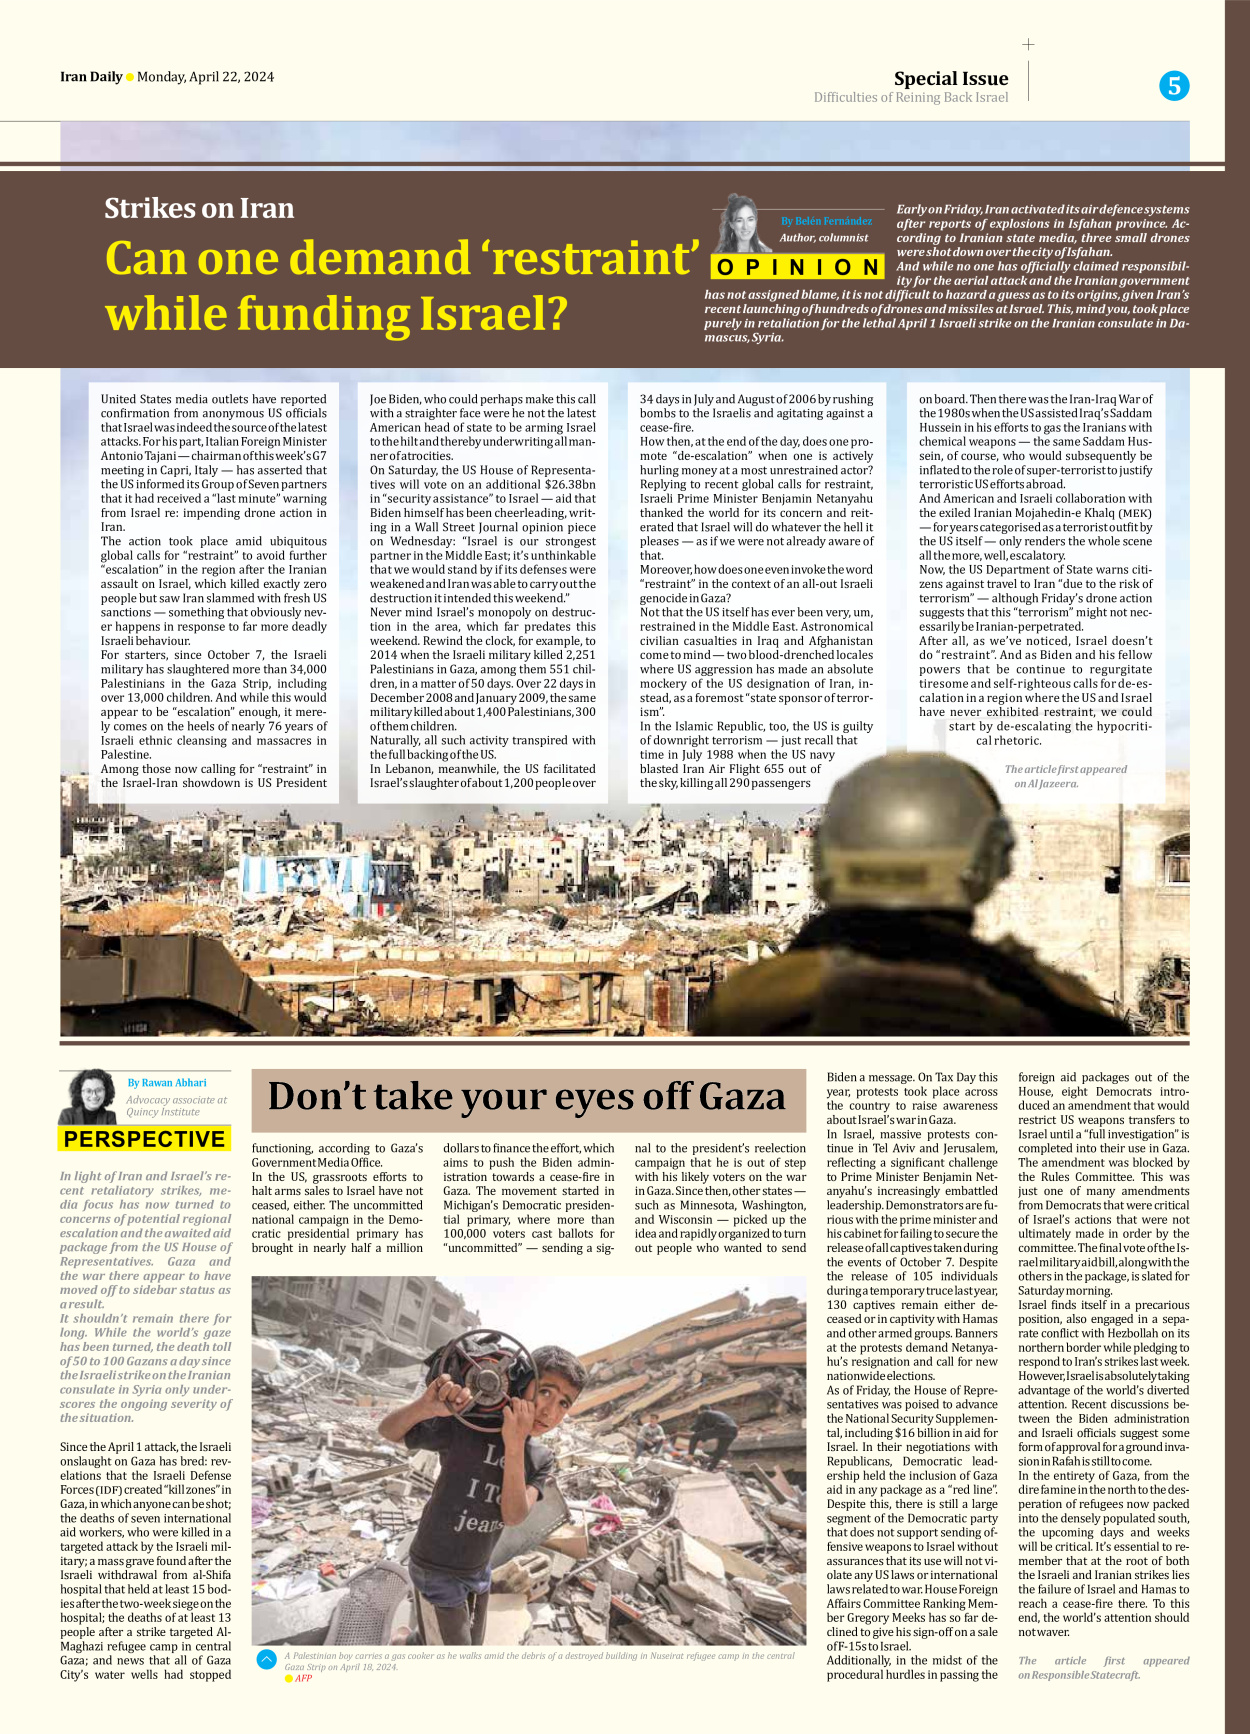 Iran Daily - Number Seven Thousand Five Hundred and Thirty Nine - 22 April 2024 - Page 5